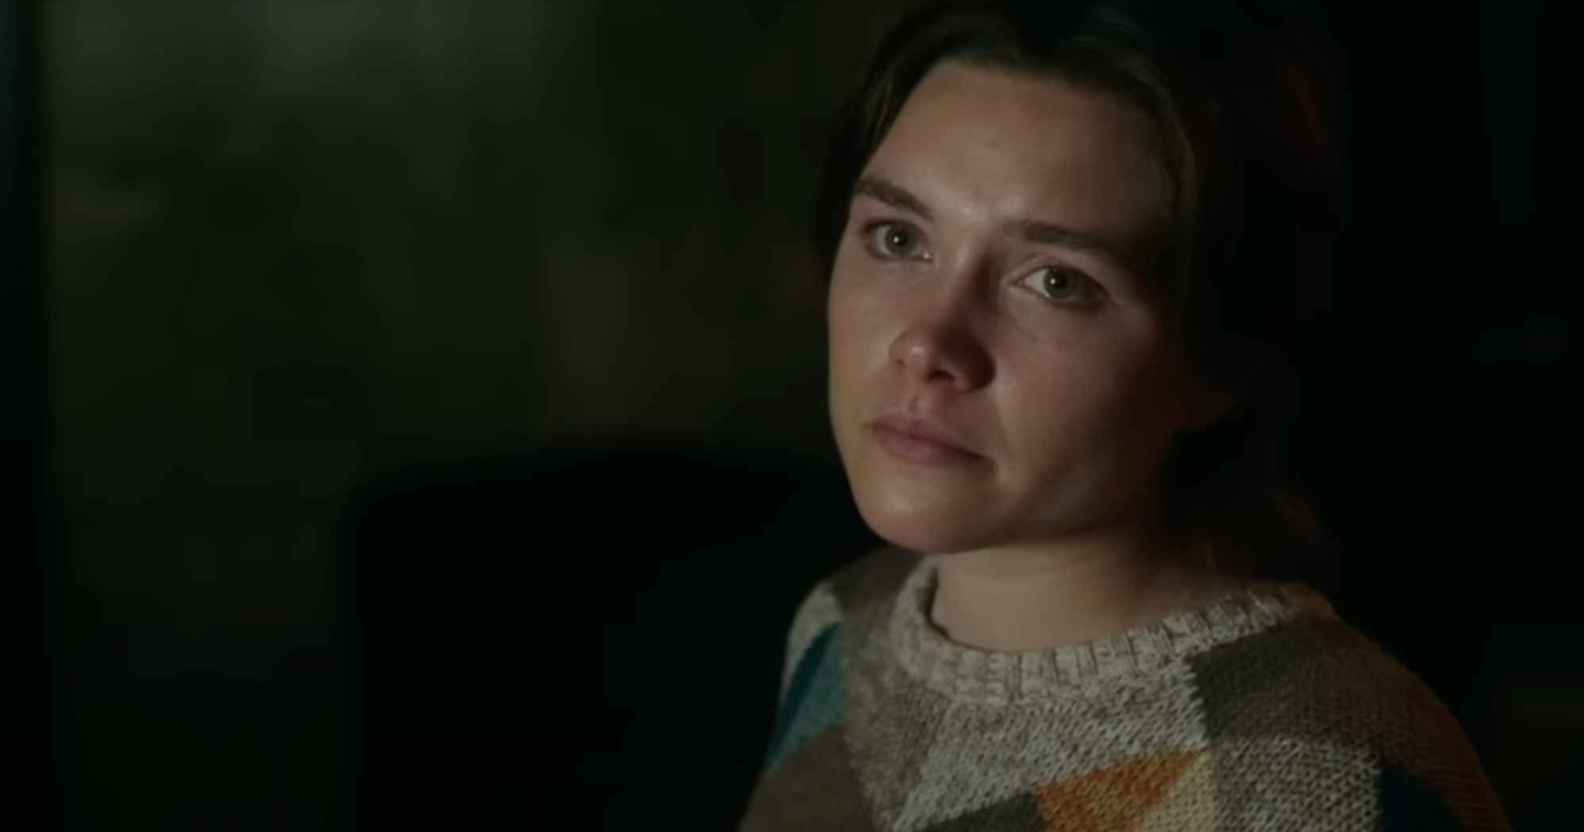 A Good Person' trailer featuring Florence Pugh will make you cry